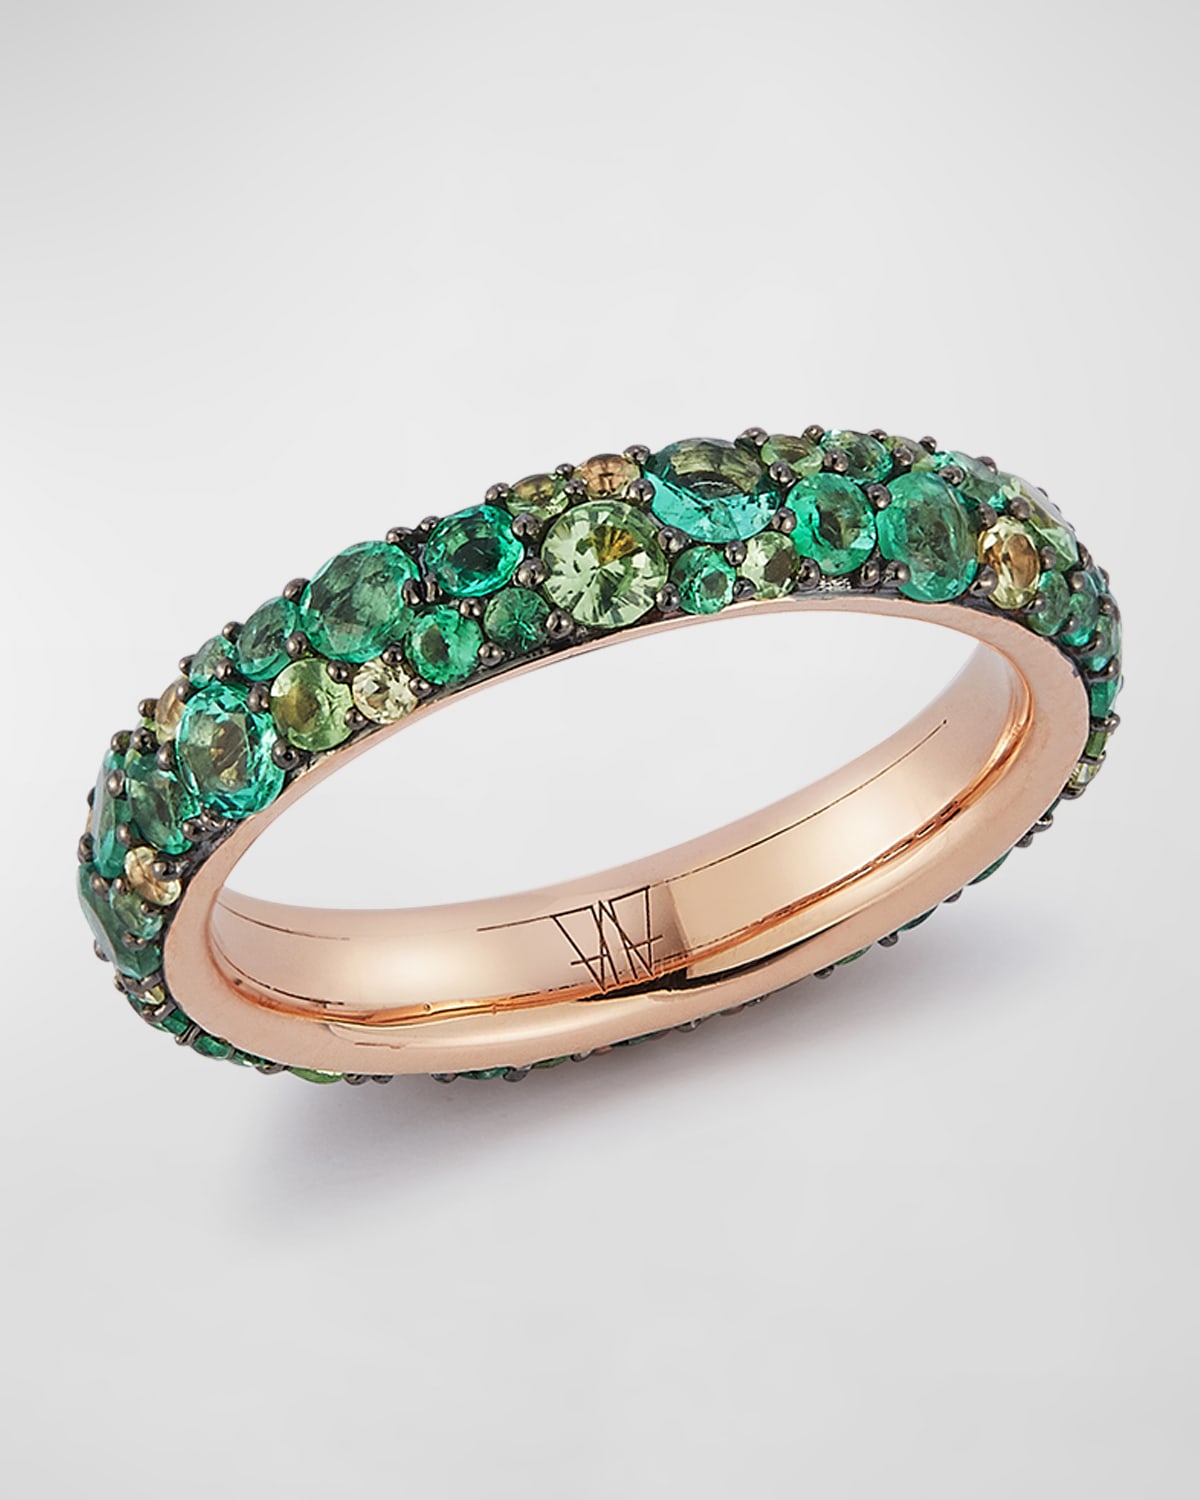 18K Rose Gold 3.5mm Band Ring with Green Emeralds, Size 6